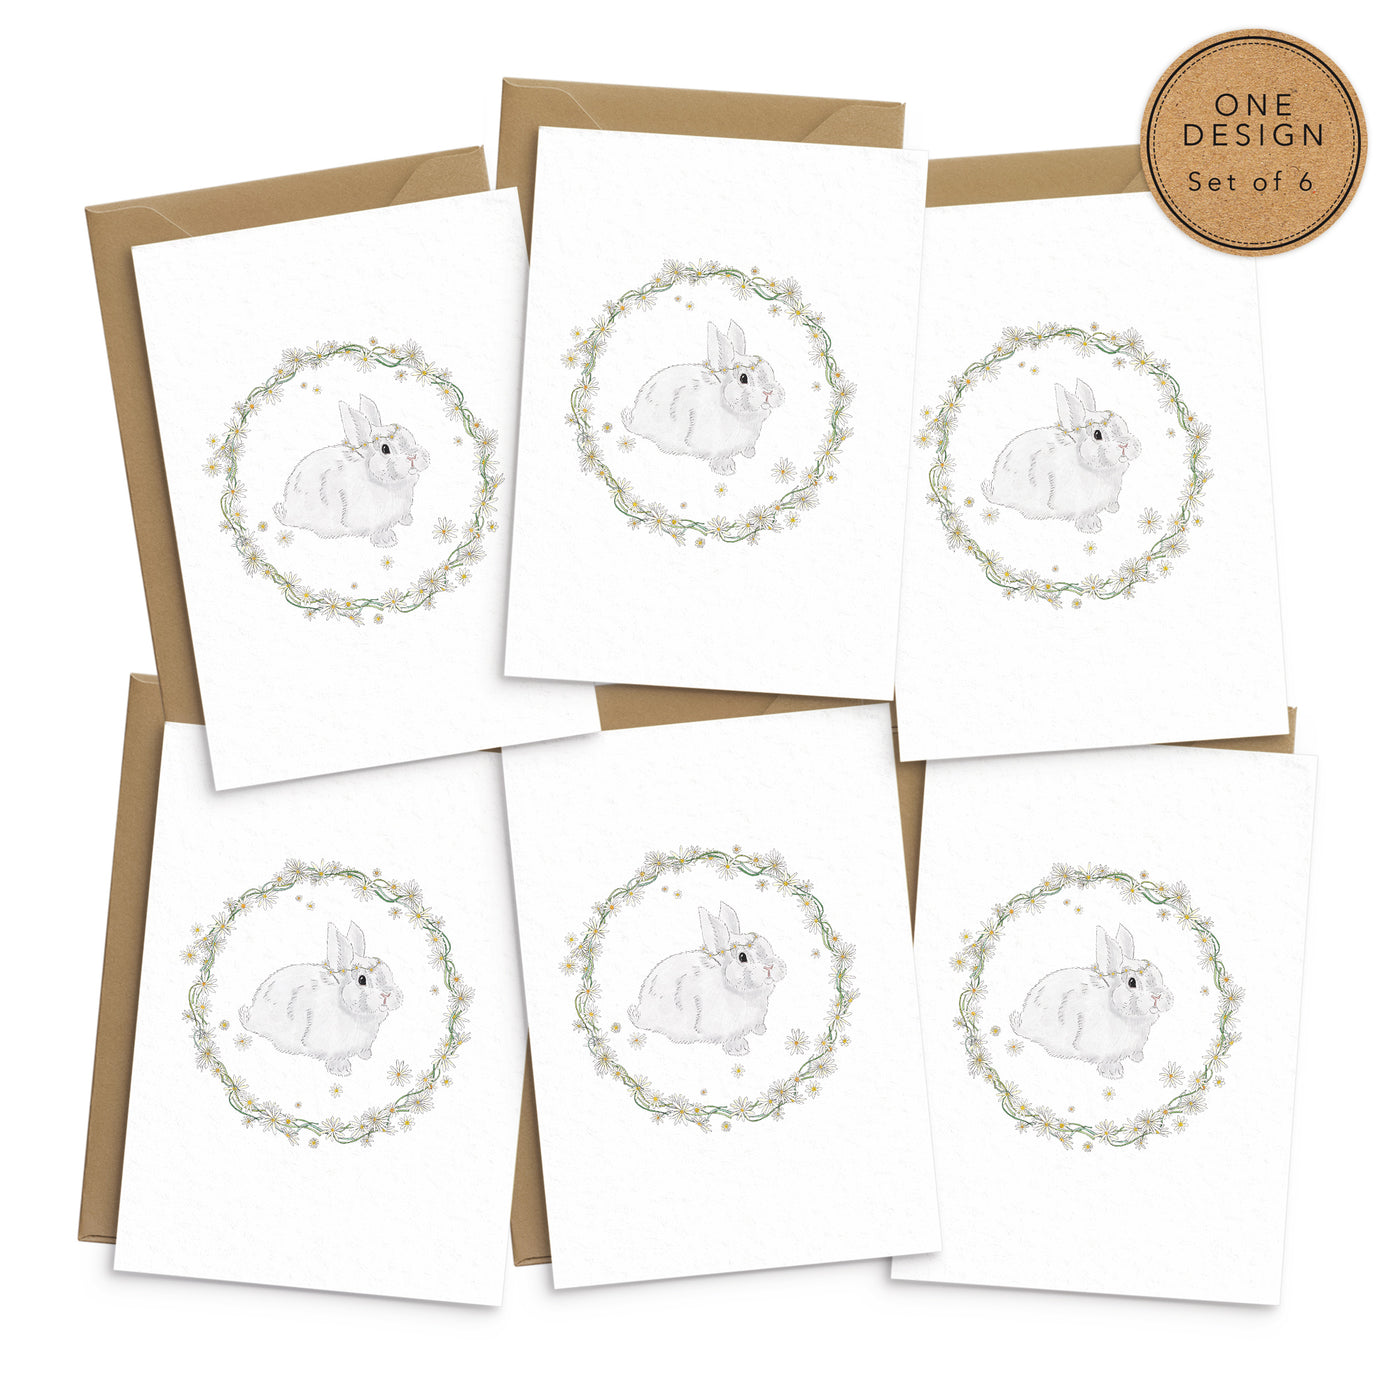 A set of 6 spring themed greetings cards featuring a white bunny wearing a daisy crown pictured inside a rather made of daisies and greenery. No text. Photo shows 6 cards laid out on top of recycled brown envelopes. Easter greetings cards by Poppins and co.